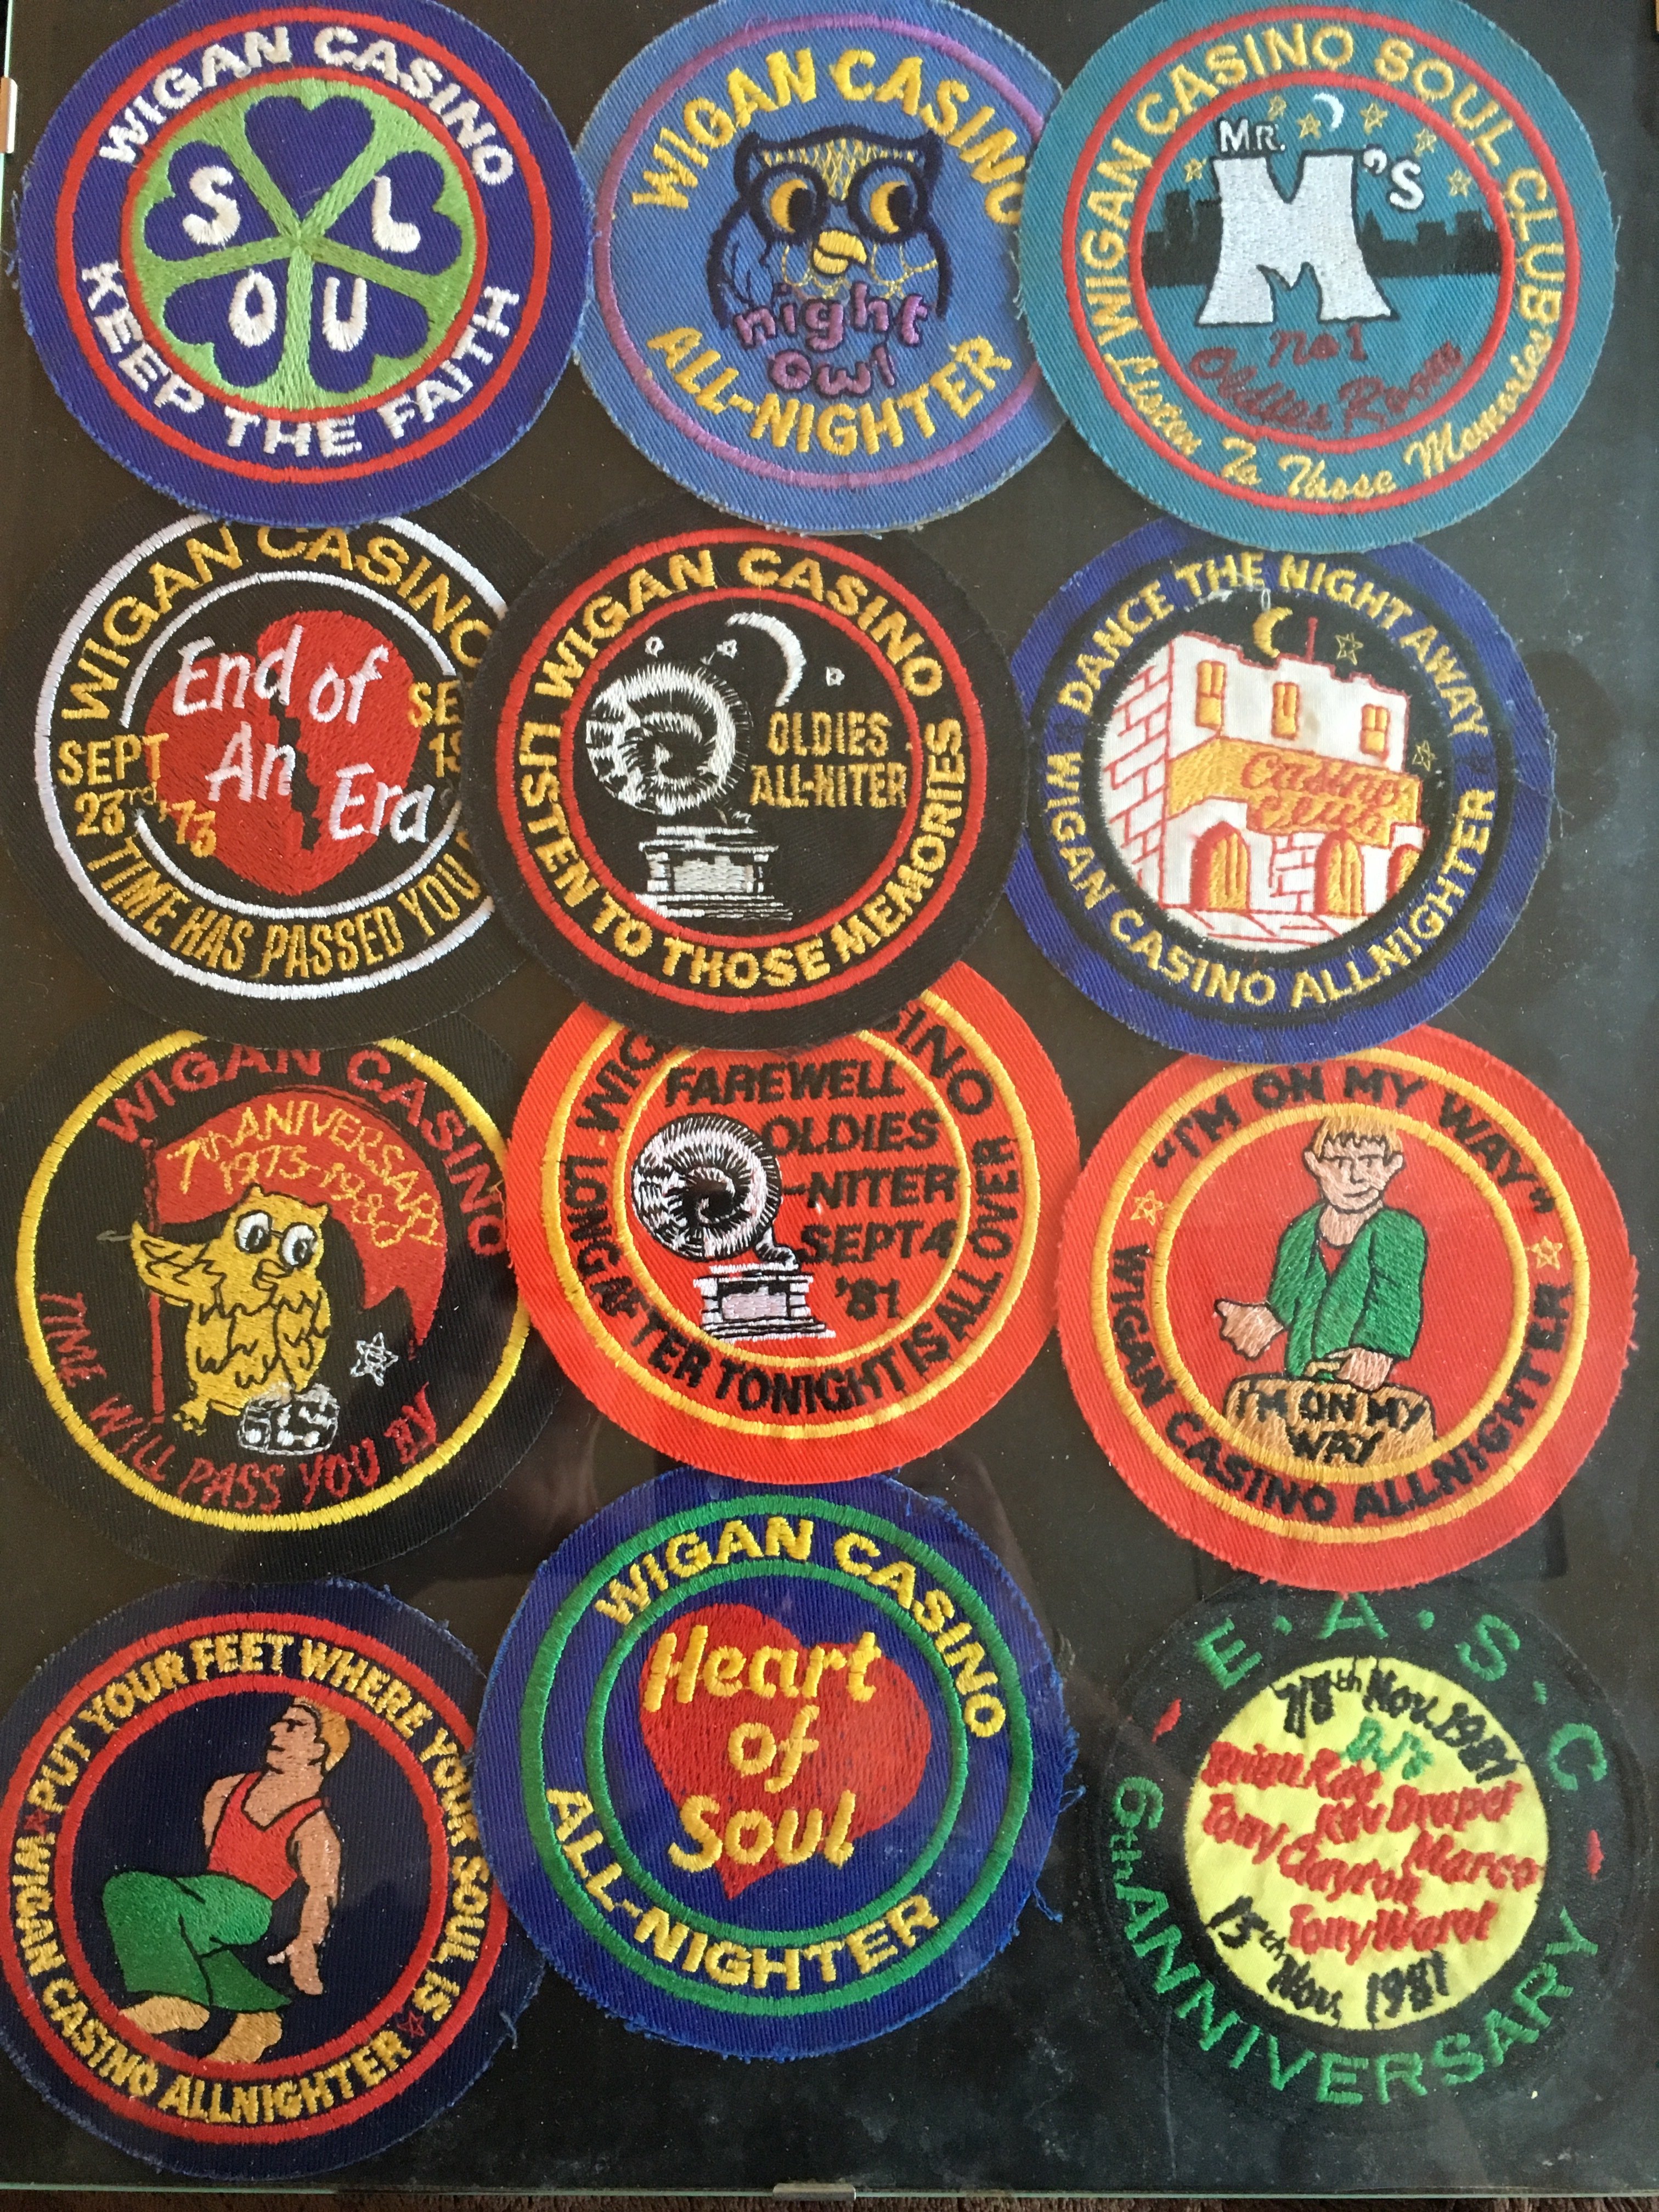 WANTED WIGAN CASINO ANNIVERSARY PATCHES - Soul Source